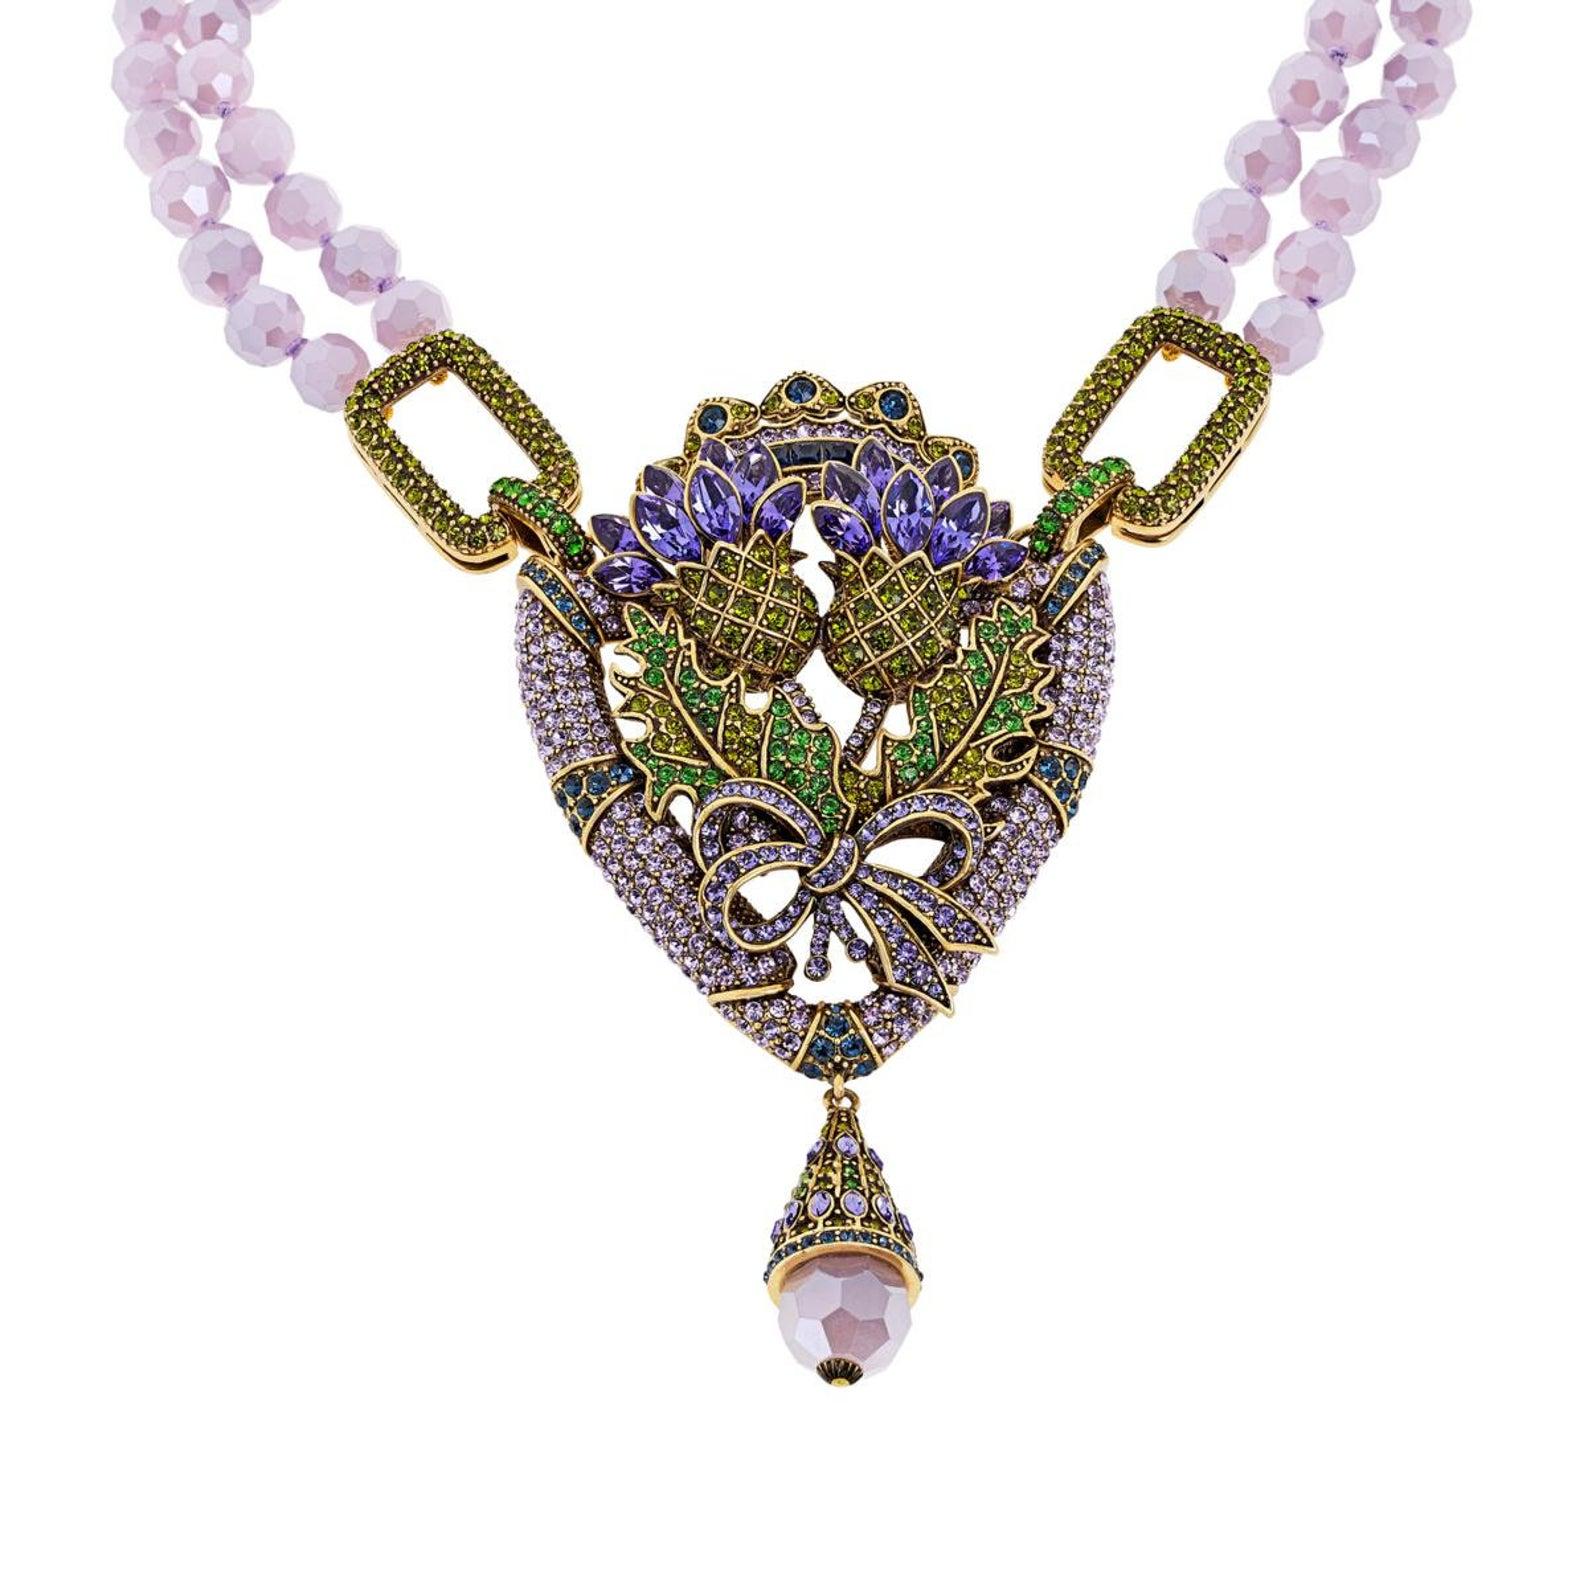 Flowers wilt, but jewelry lasts forever. Express your love of all things beautiful with this sparkling crystal-adorned wearable art piece from Heidi Daus.

Design Information
2 strands of individually knotted, faceted violet opal-colored glass